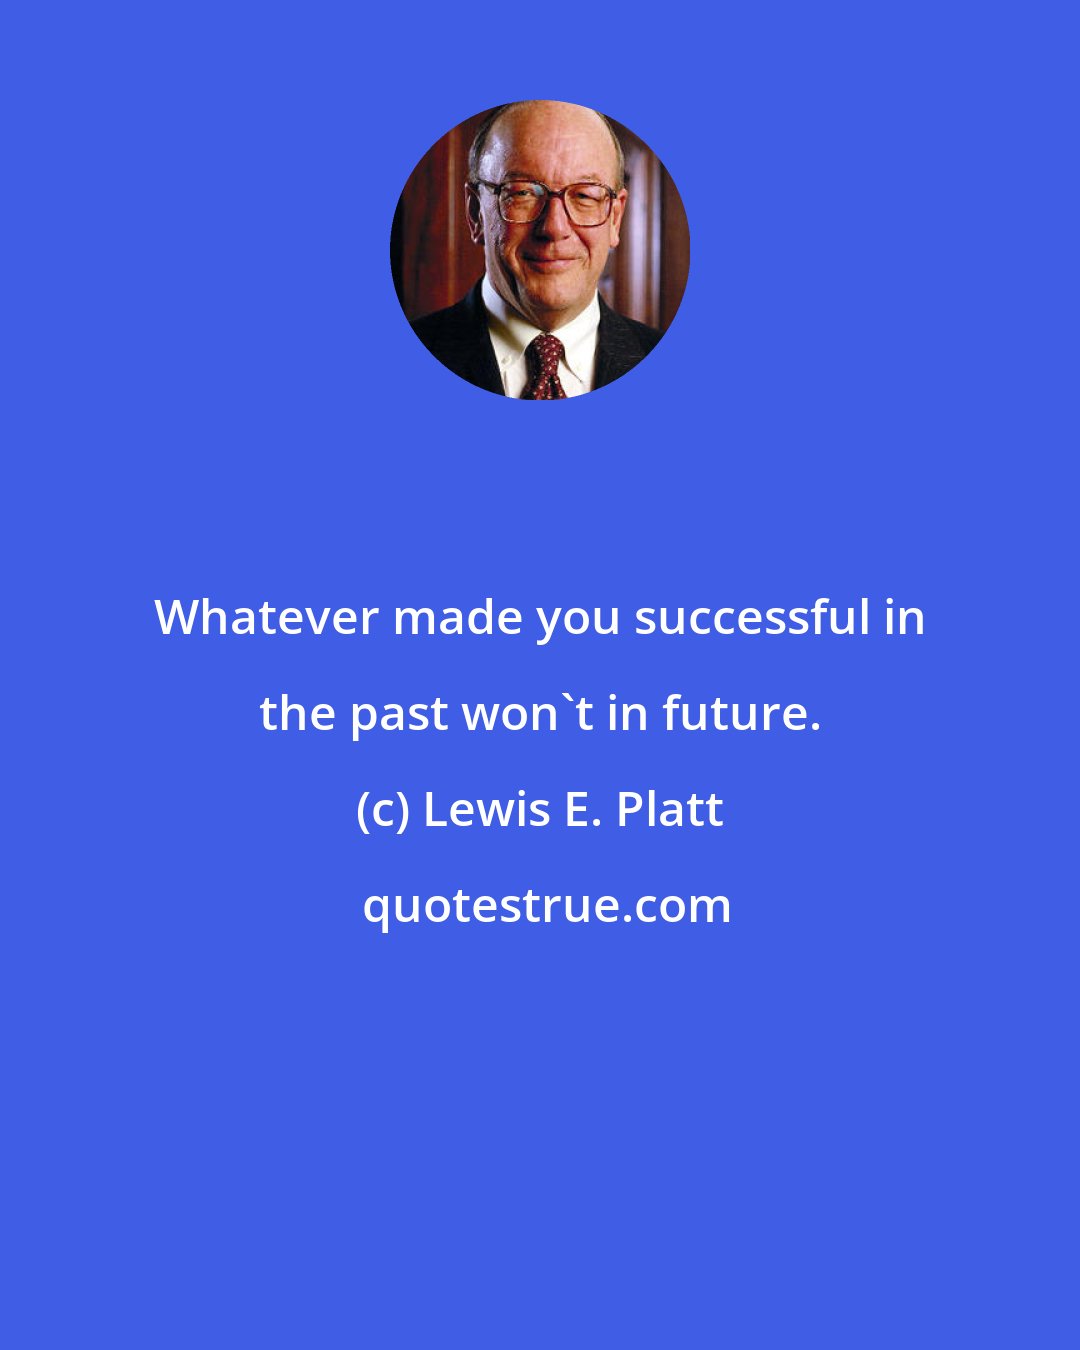 Lewis E. Platt: Whatever made you successful in the past won't in future.